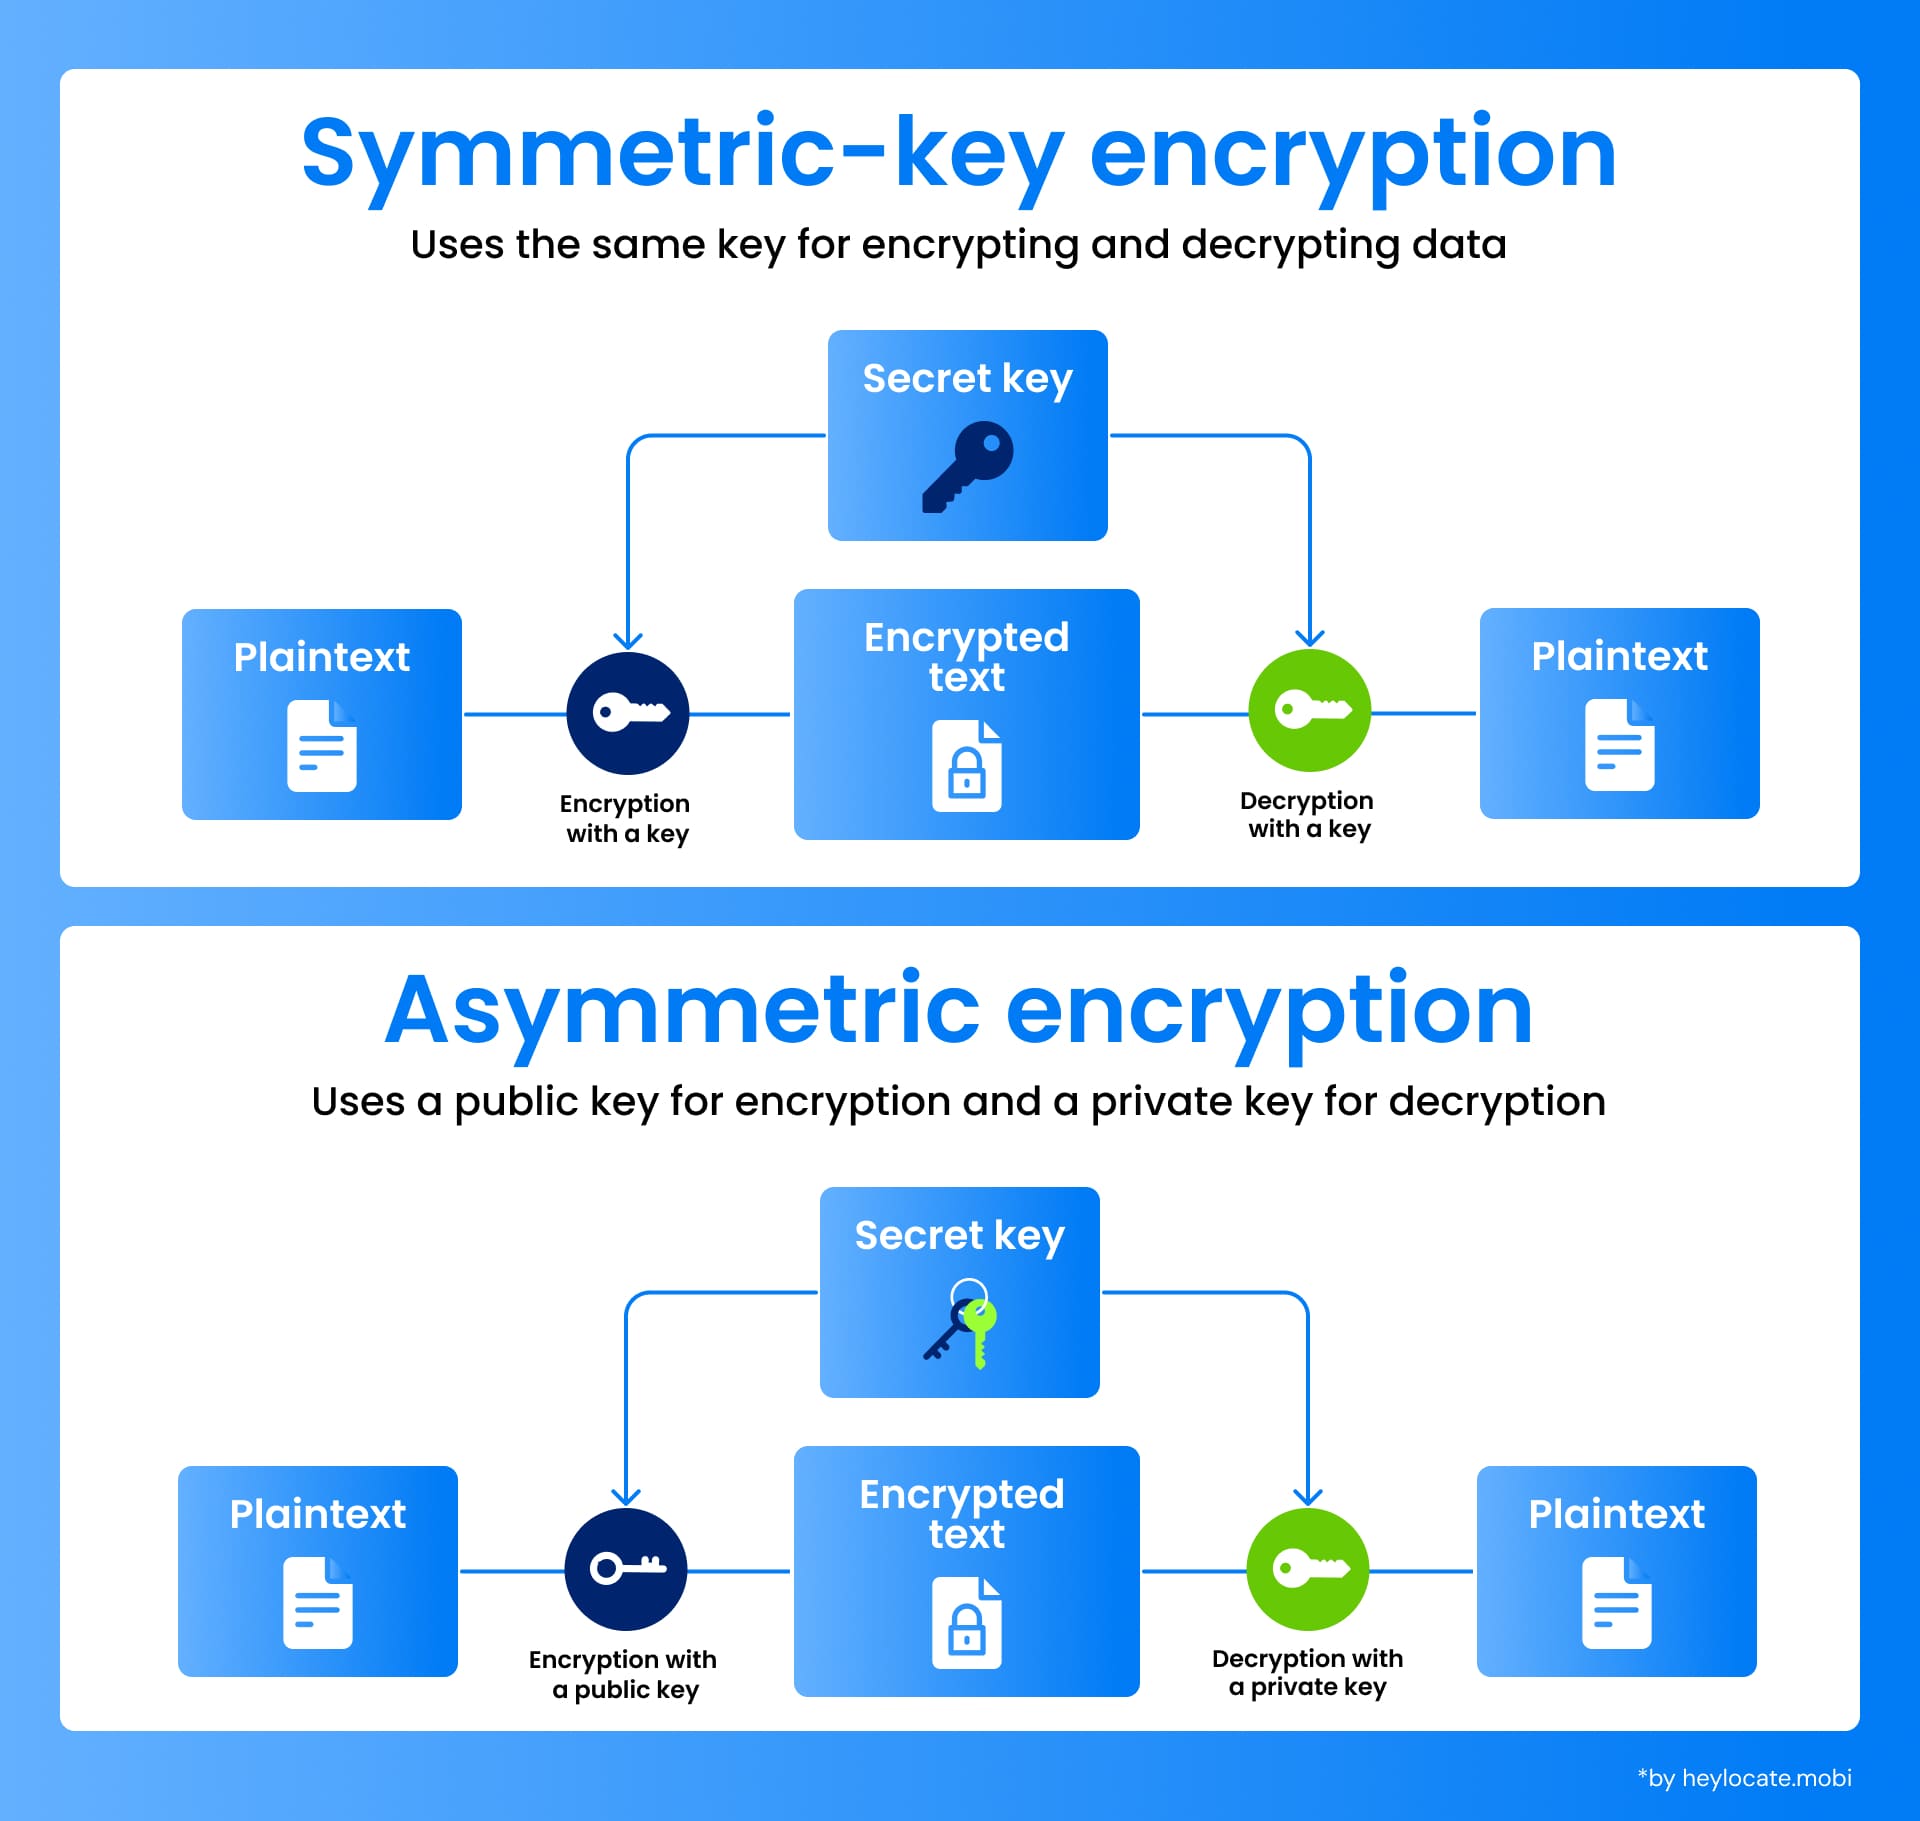 An infographic explaining symmetric-key encryption with the same key for both encrypting and decrypting, contrasted with asymmetric encryption which uses a public key to encrypt and a private key to decrypt